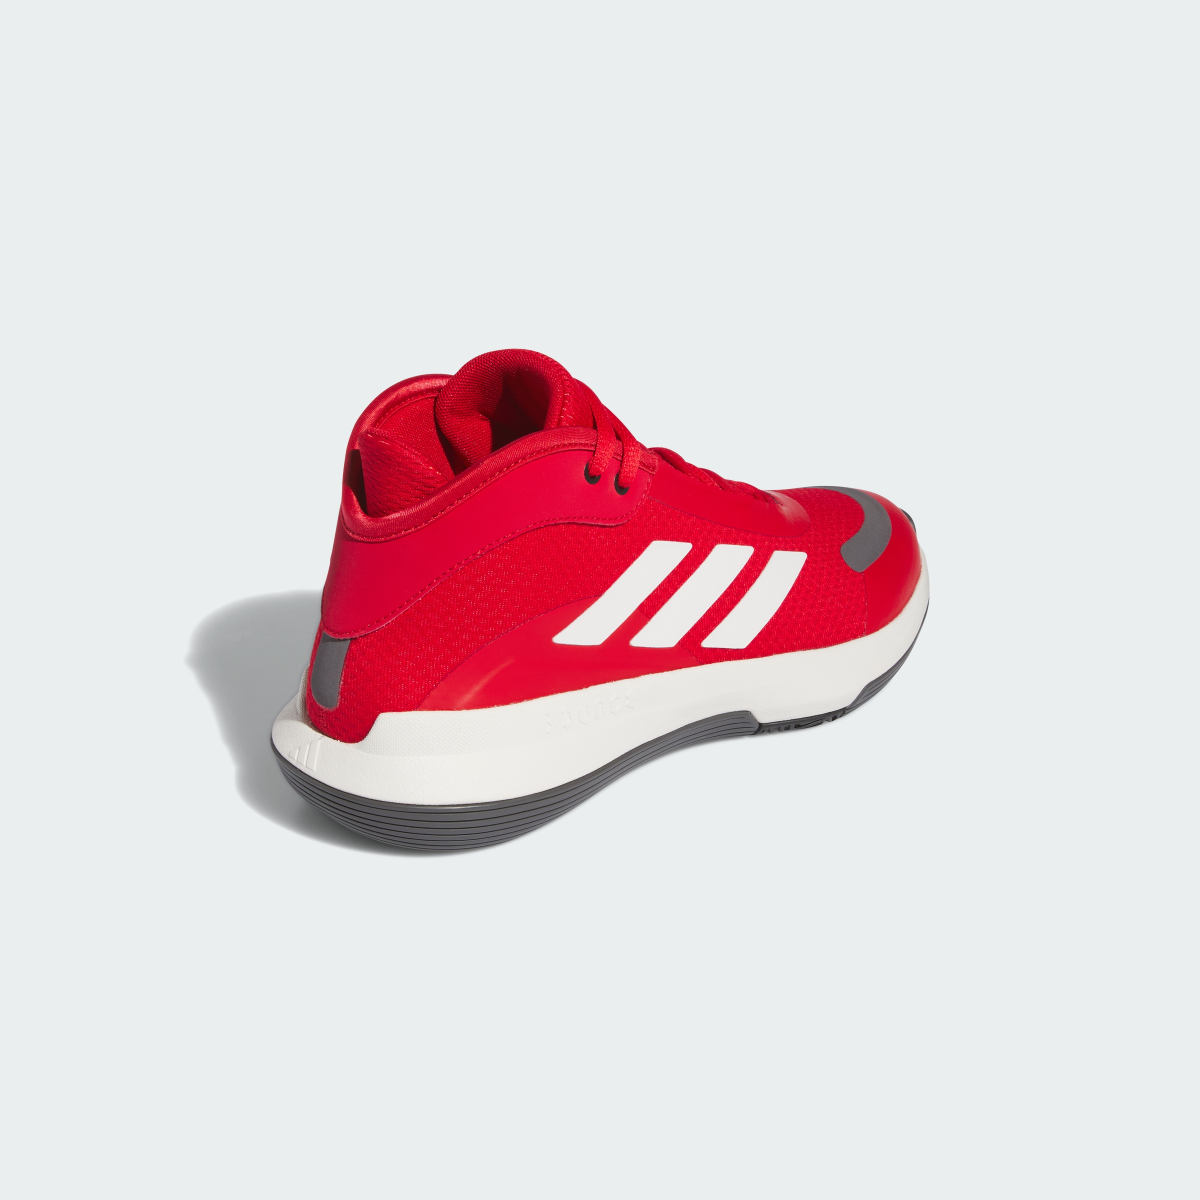 Adidas Bounce Legends Low Basketball Shoes. 8